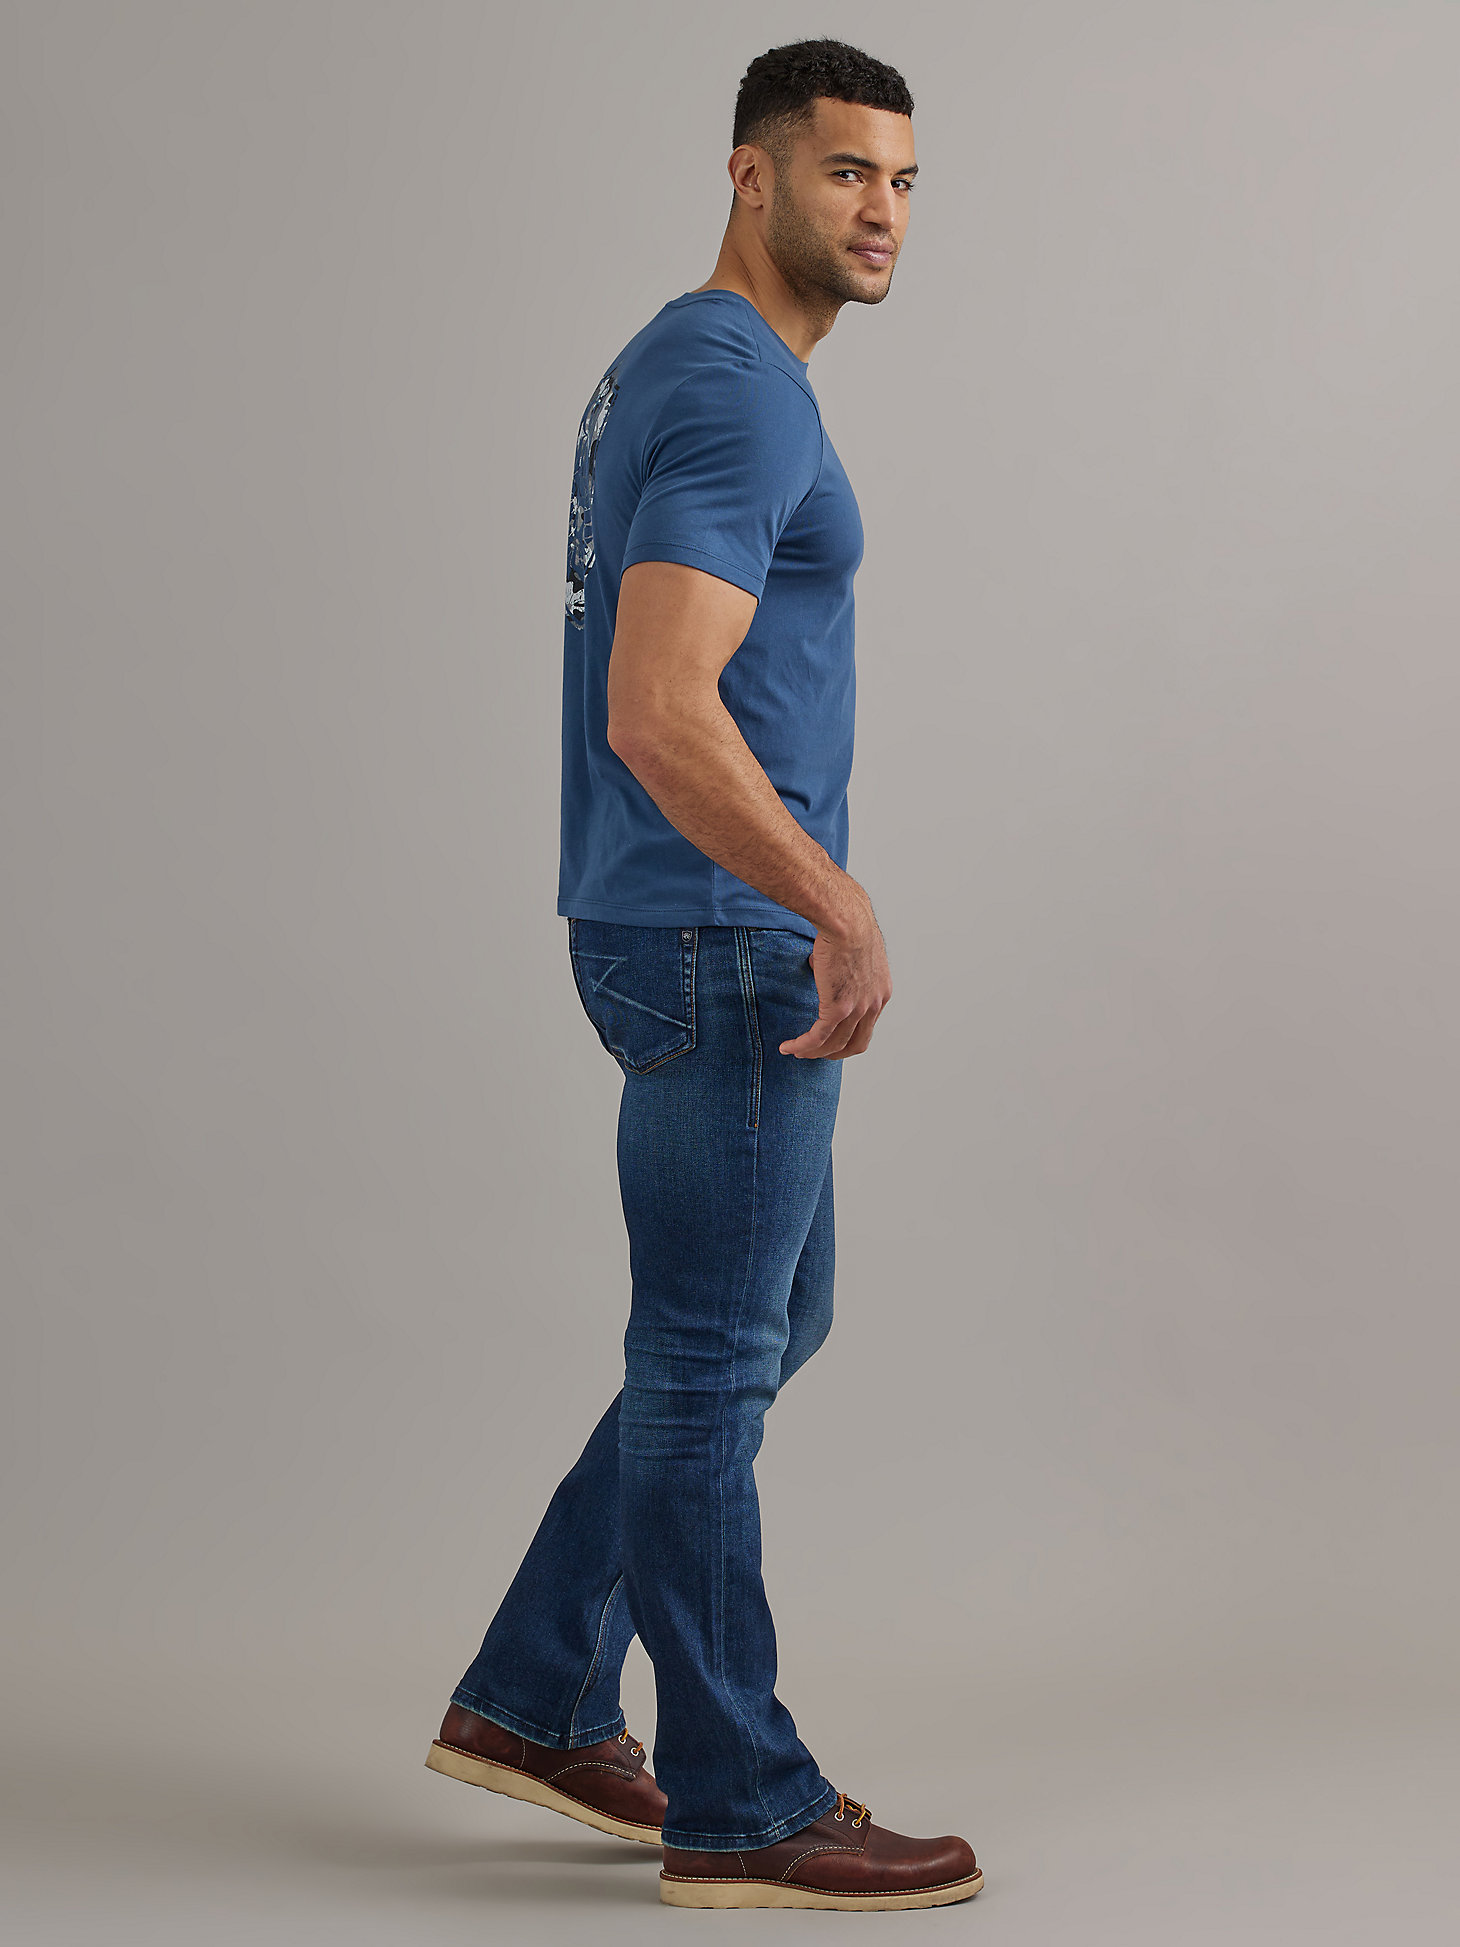 Men's Henlee Bootcut Jean in Hall of Fame alternative view 2